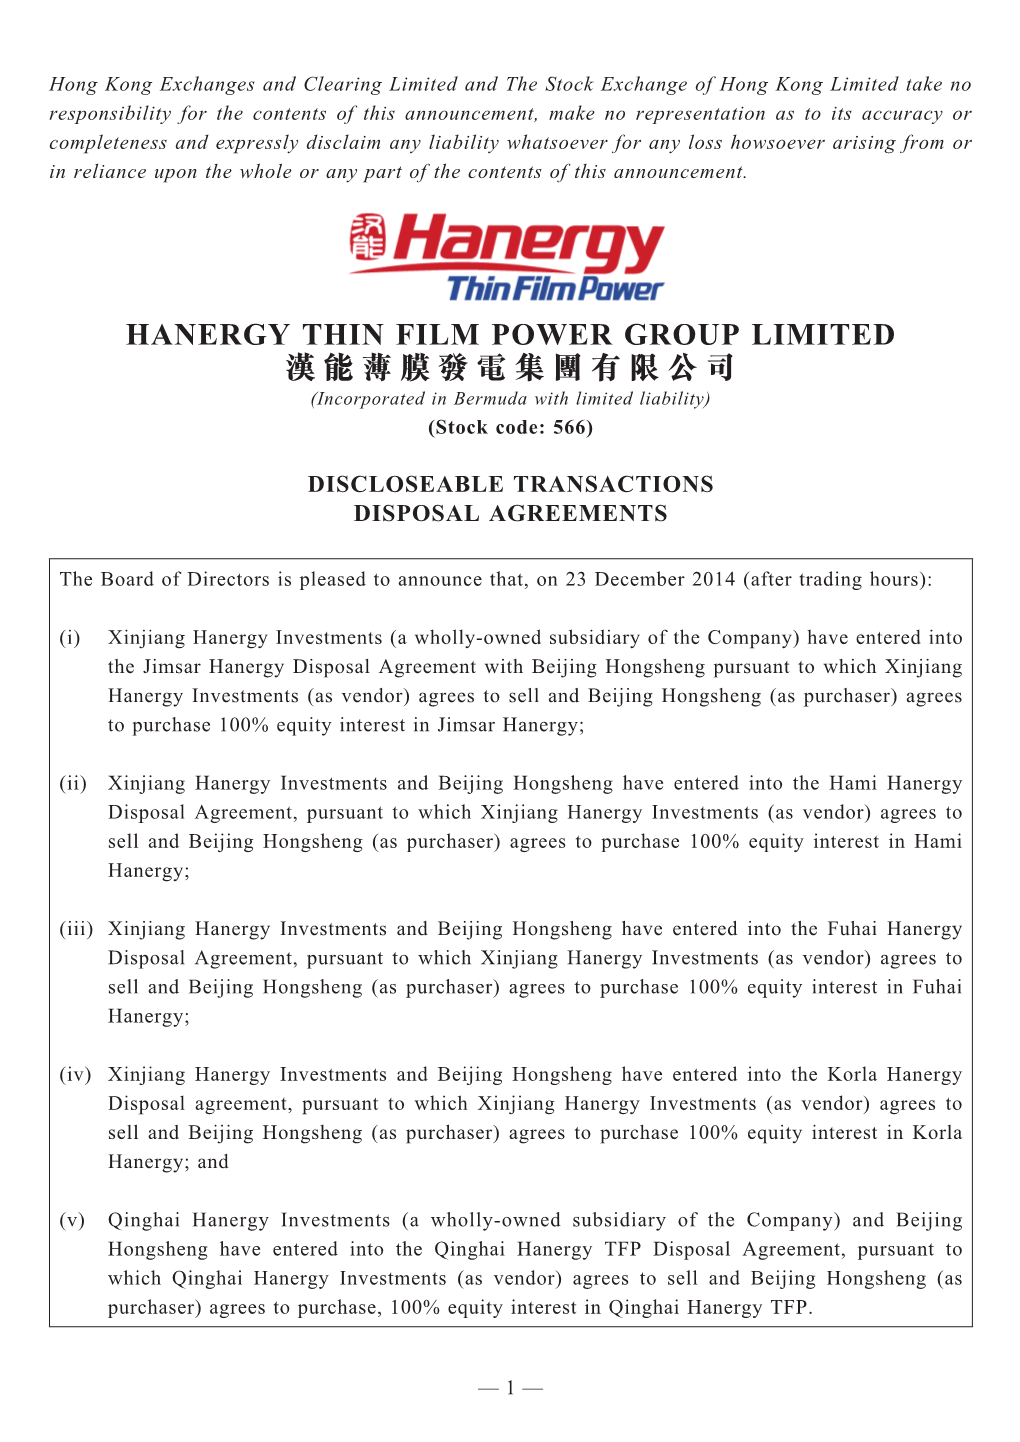 HANERGY THIN FILM POWER GROUP LIMITED 漢 能 薄 膜 發 電 集 團 有 限 公 司 (Incorporated in Bermuda with Limited Liability) (Stock Code: 566)